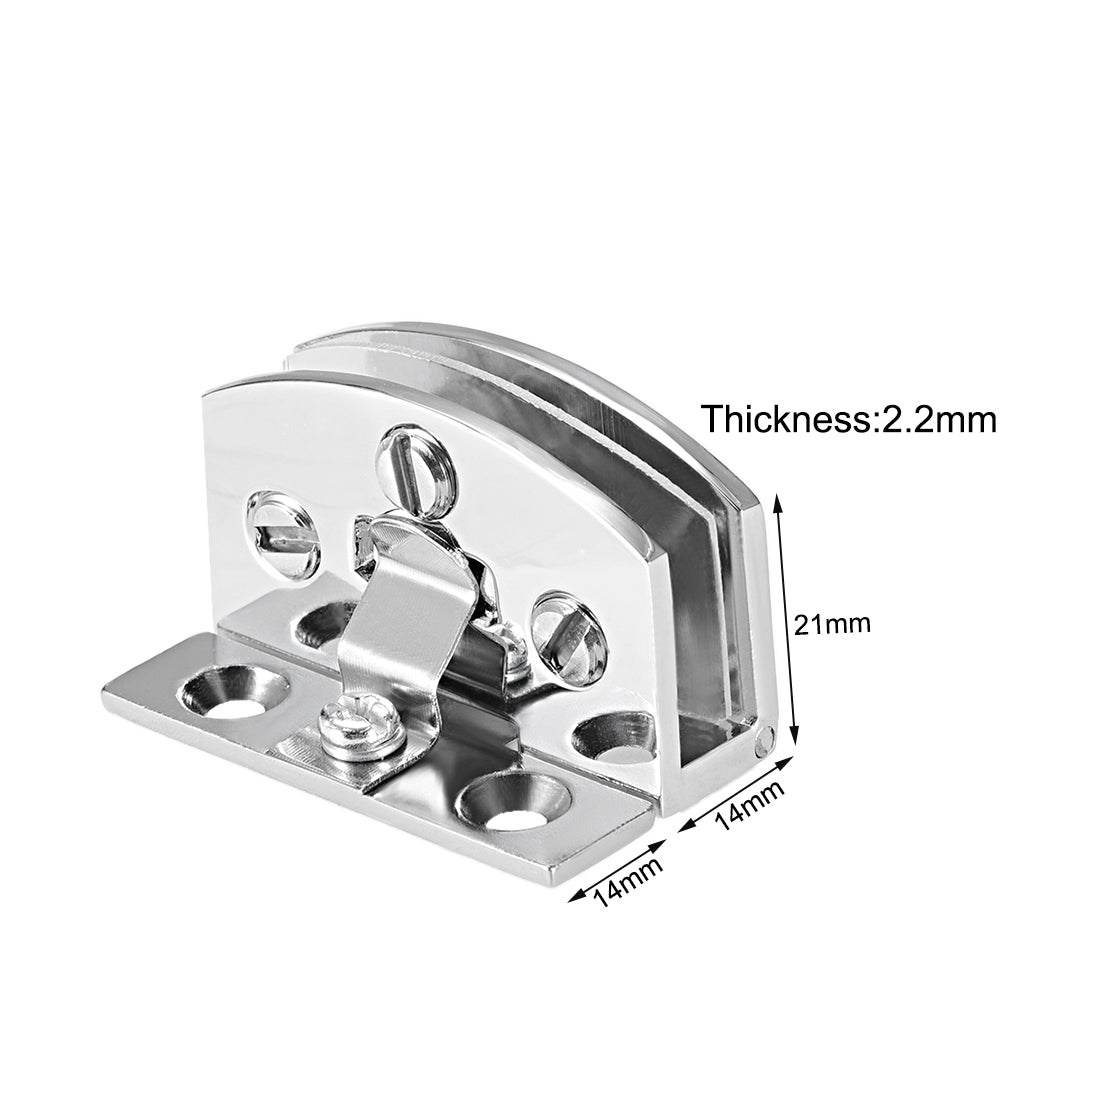 uxcell Uxcell Glass Door Hinge Cupboard Showcase Cabinet Door Hinge Glass Clamp Zinc Alloy for 5 - 8mm Glass Thickness 2pcs